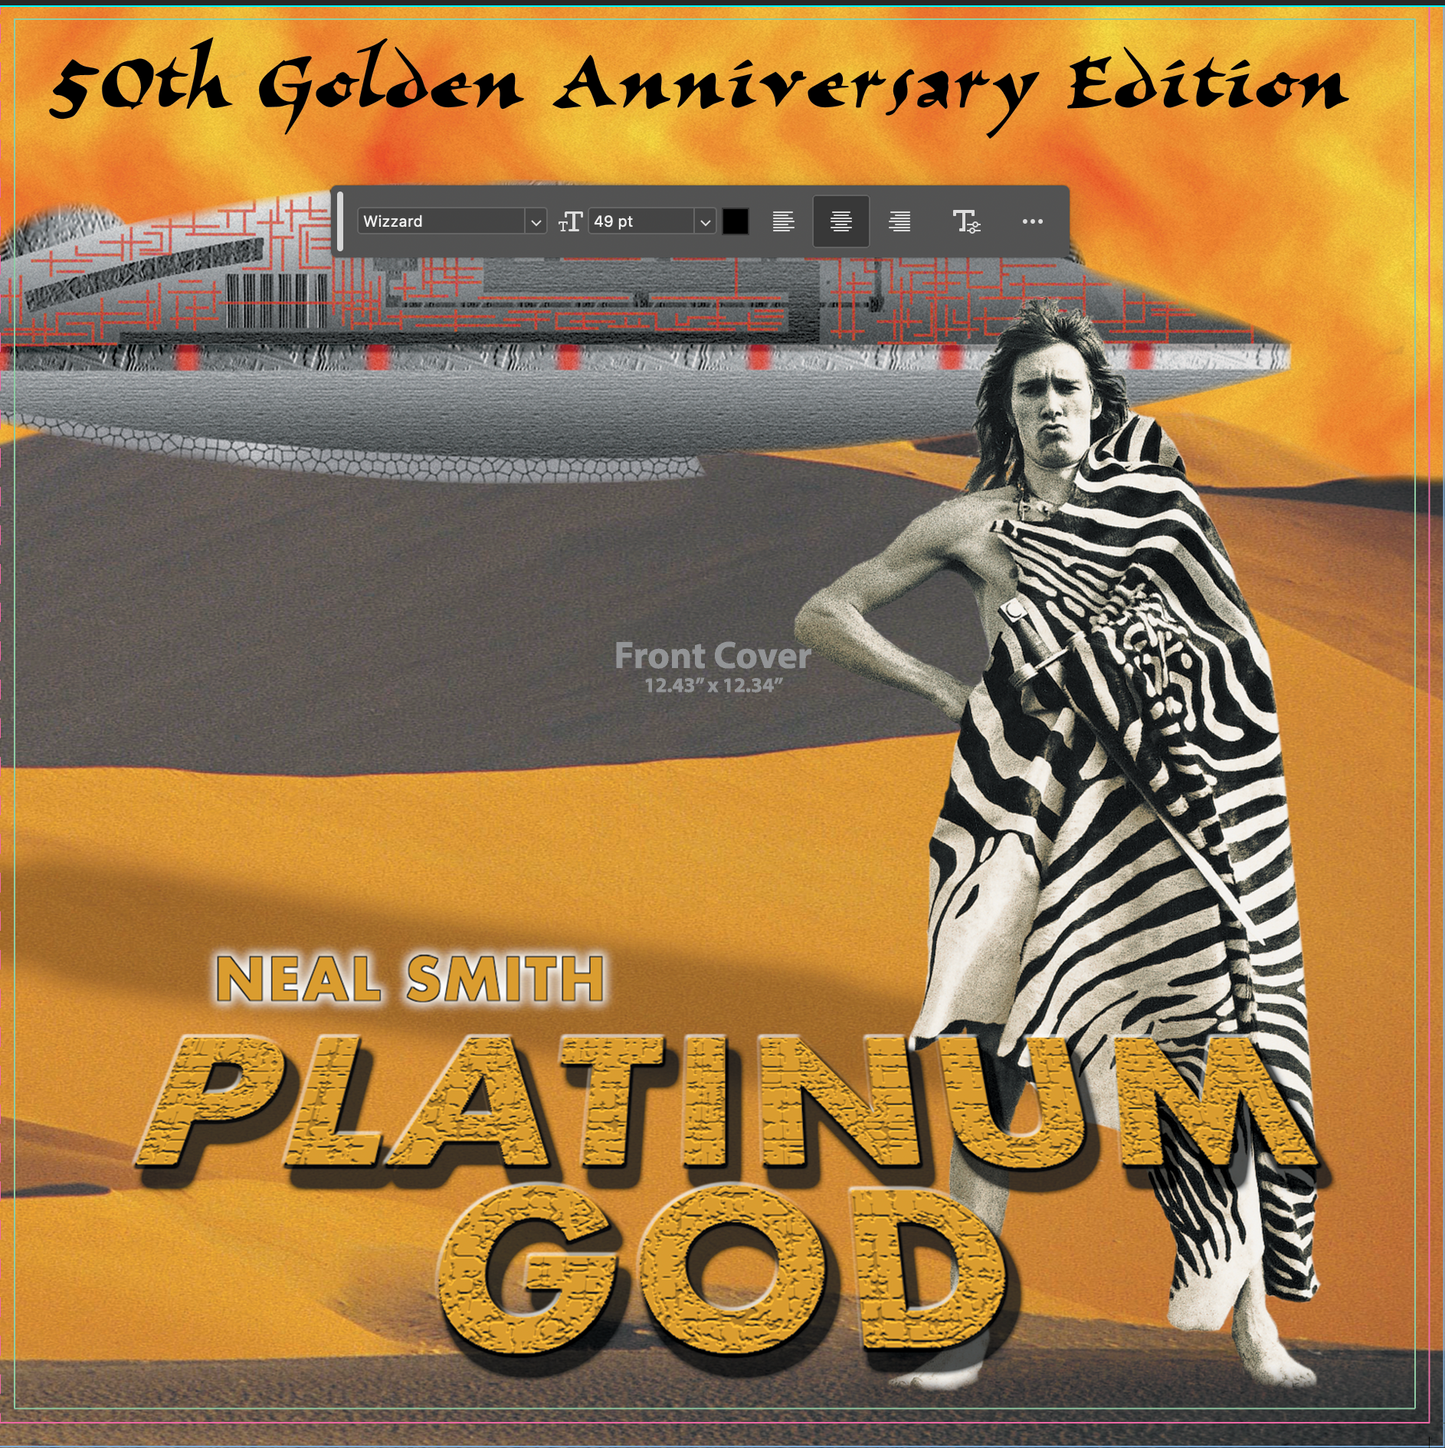 Neal Smith - Platinum God 50th Golden Anniversary Edition Vinyl - release date Oct 18th pre-order